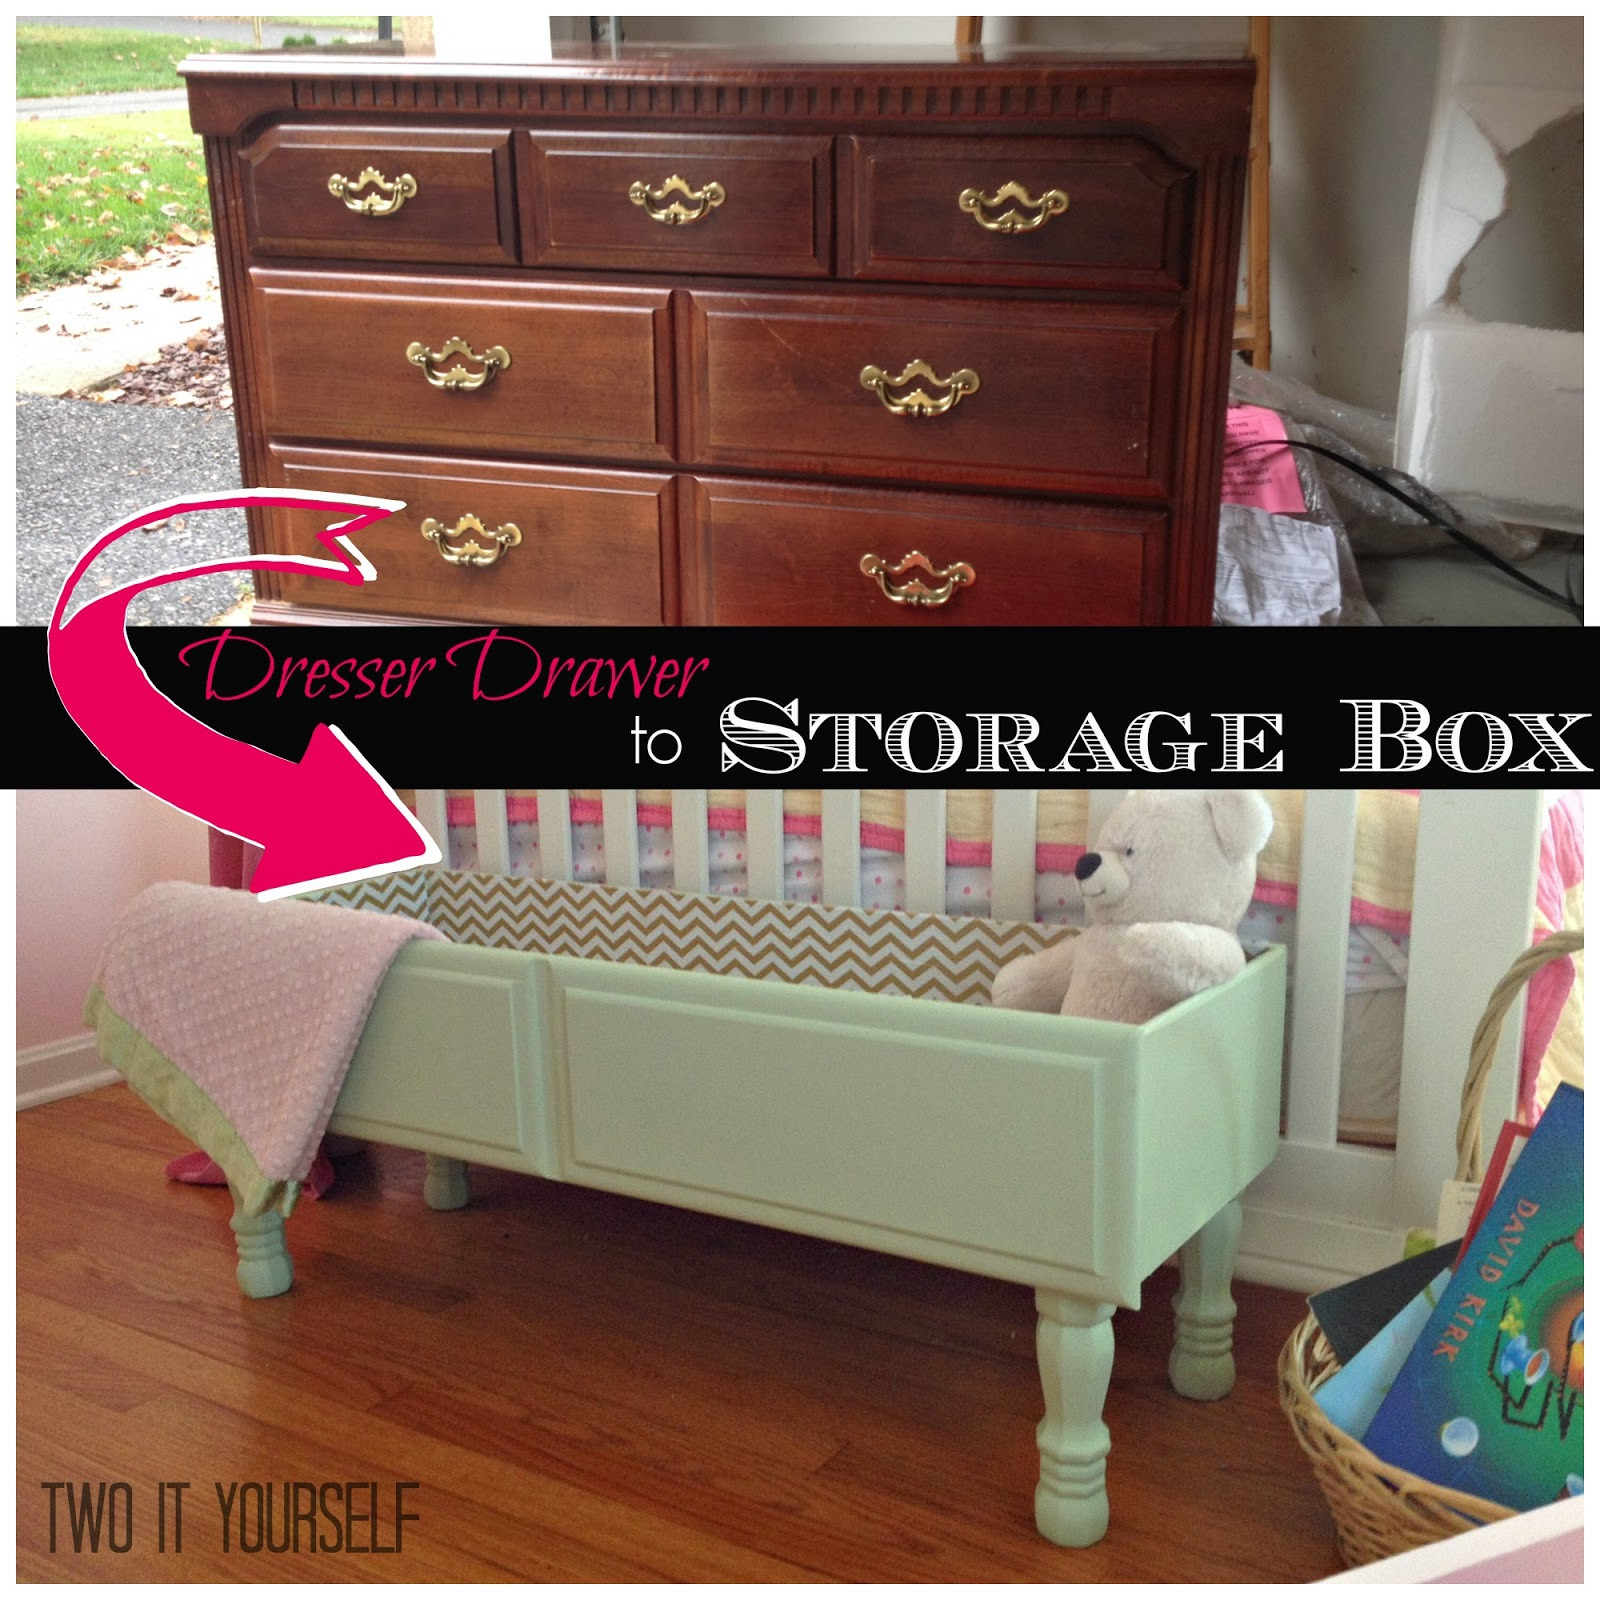 Best ideas about DIY Dresser Organizer
. Save or Pin Two It Yourself Dresser Drawer to Storage Box Easy DIY Now.